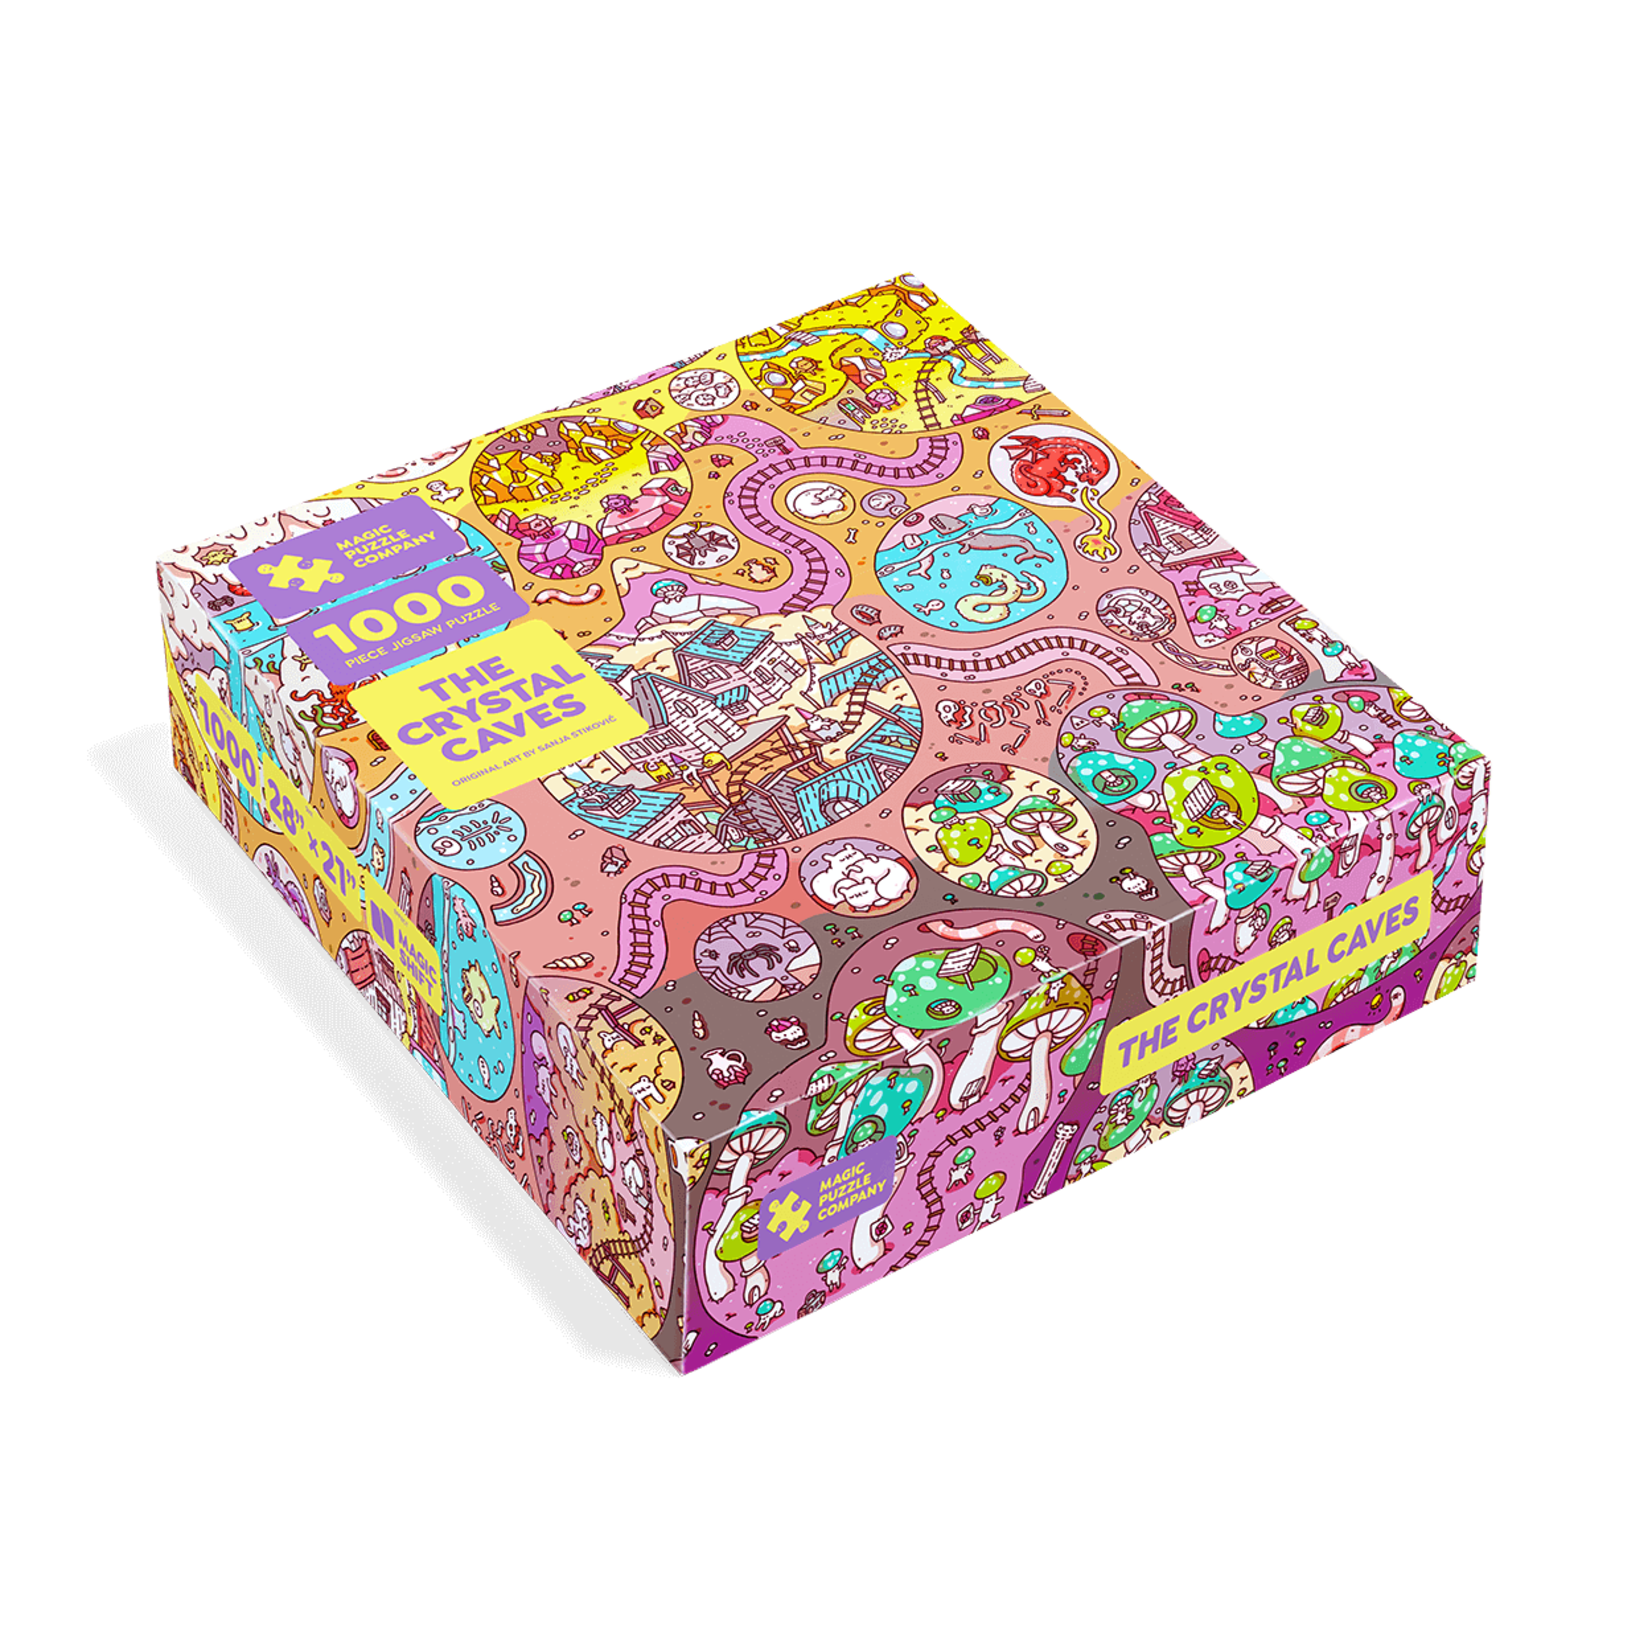 Magic Puzzle Company The Crystal Caves, 1000-Piece Jigsaw Puzzle with Bonus Logic & Illusions